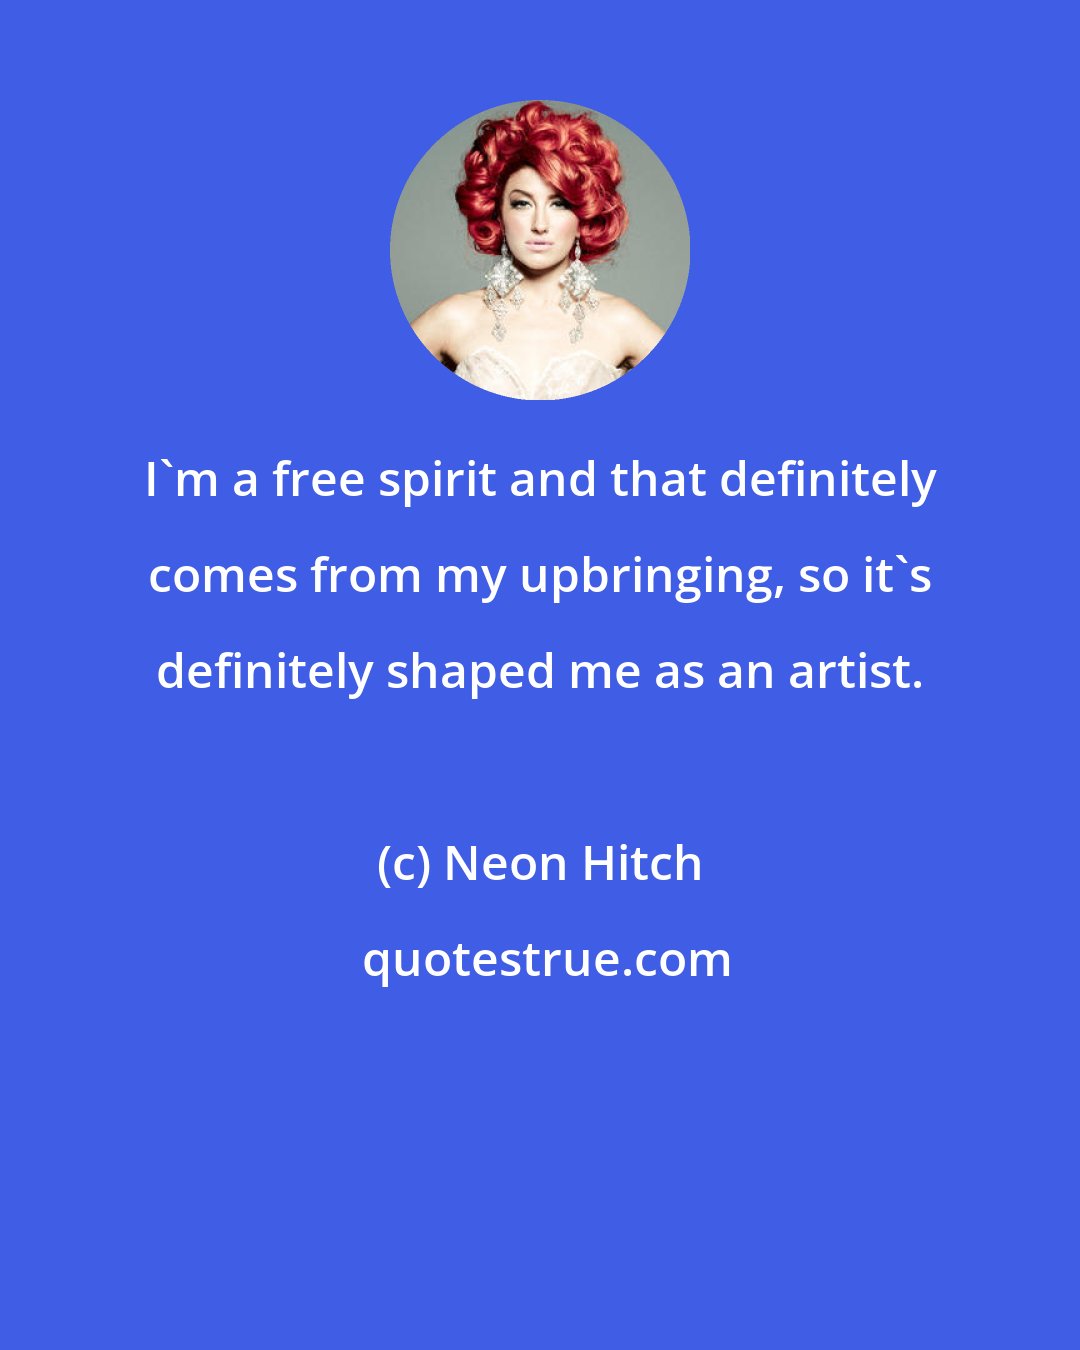 Neon Hitch: I'm a free spirit and that definitely comes from my upbringing, so it's definitely shaped me as an artist.